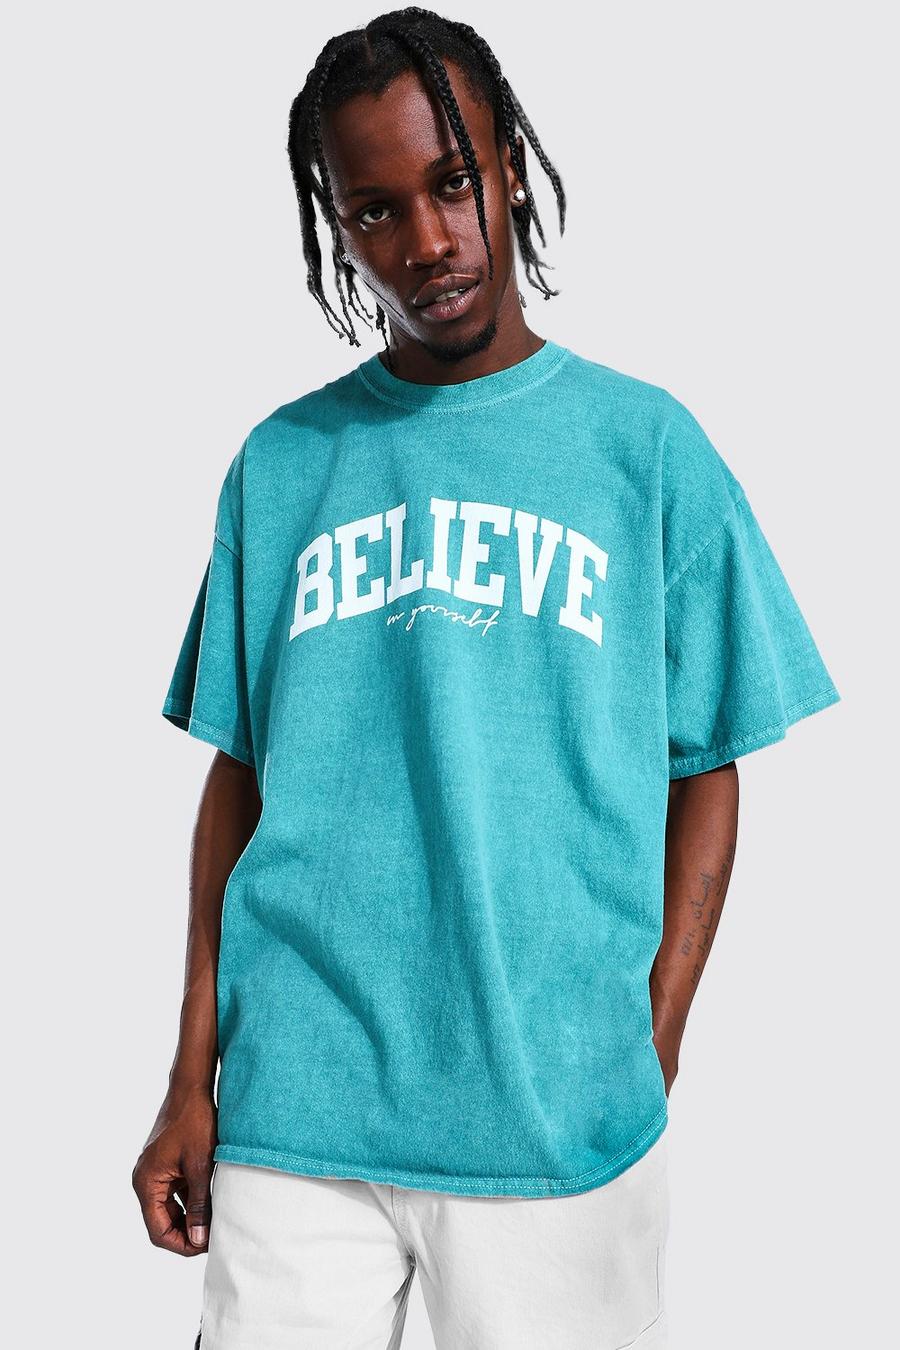 Green Believe Oversize t-shirt image number 1